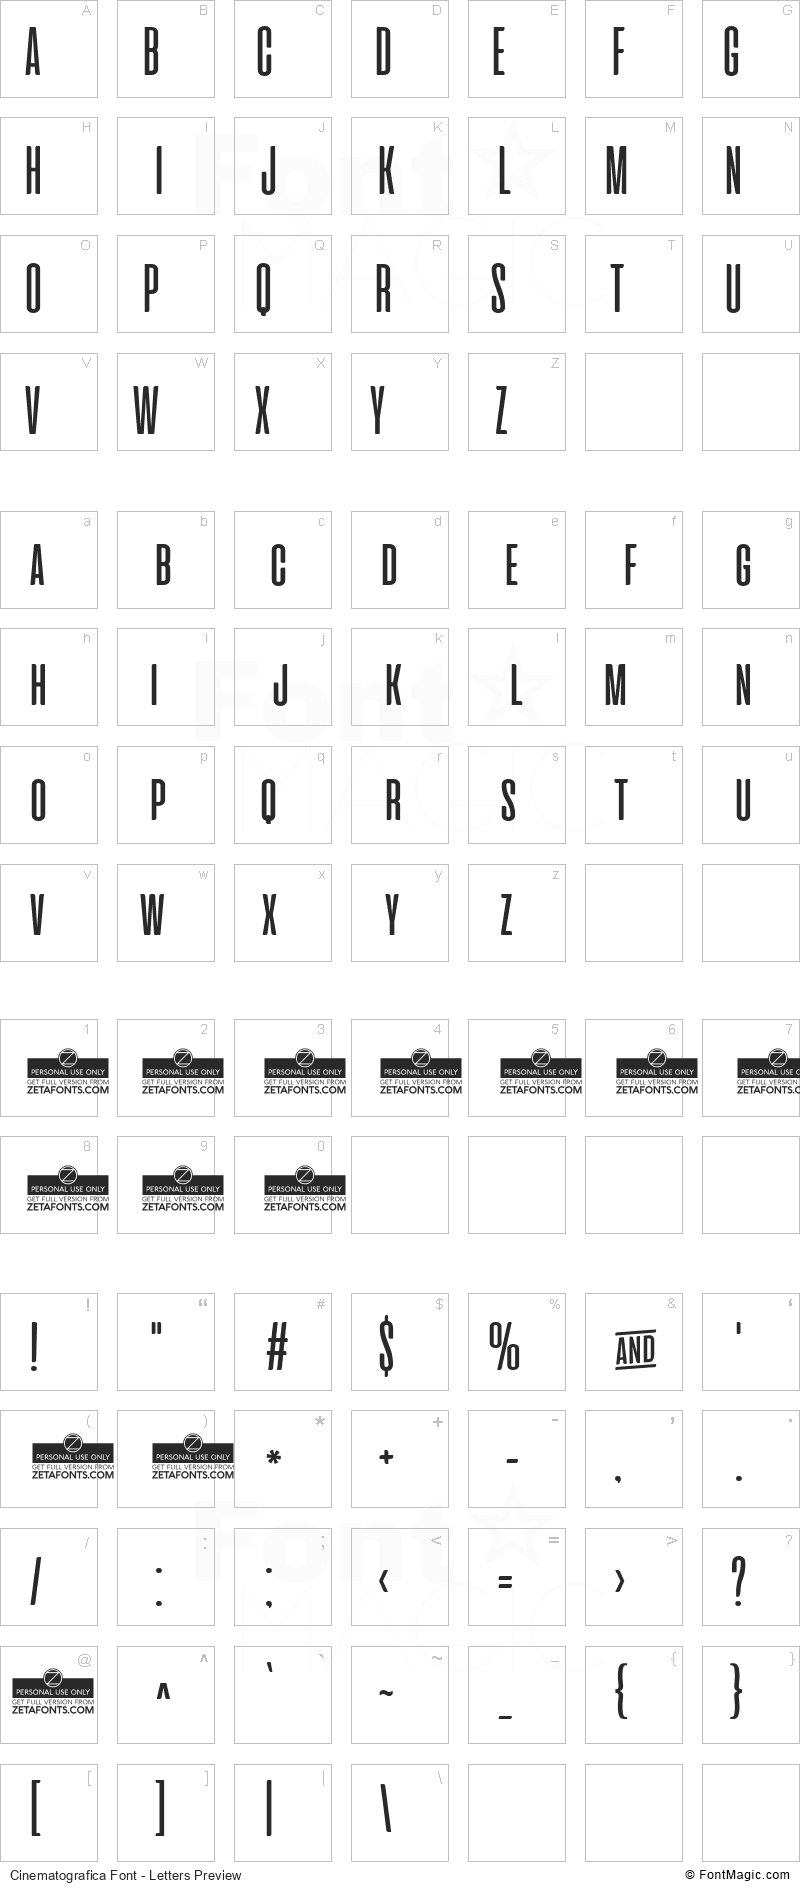 Cinematografica Font - All Latters Preview Chart